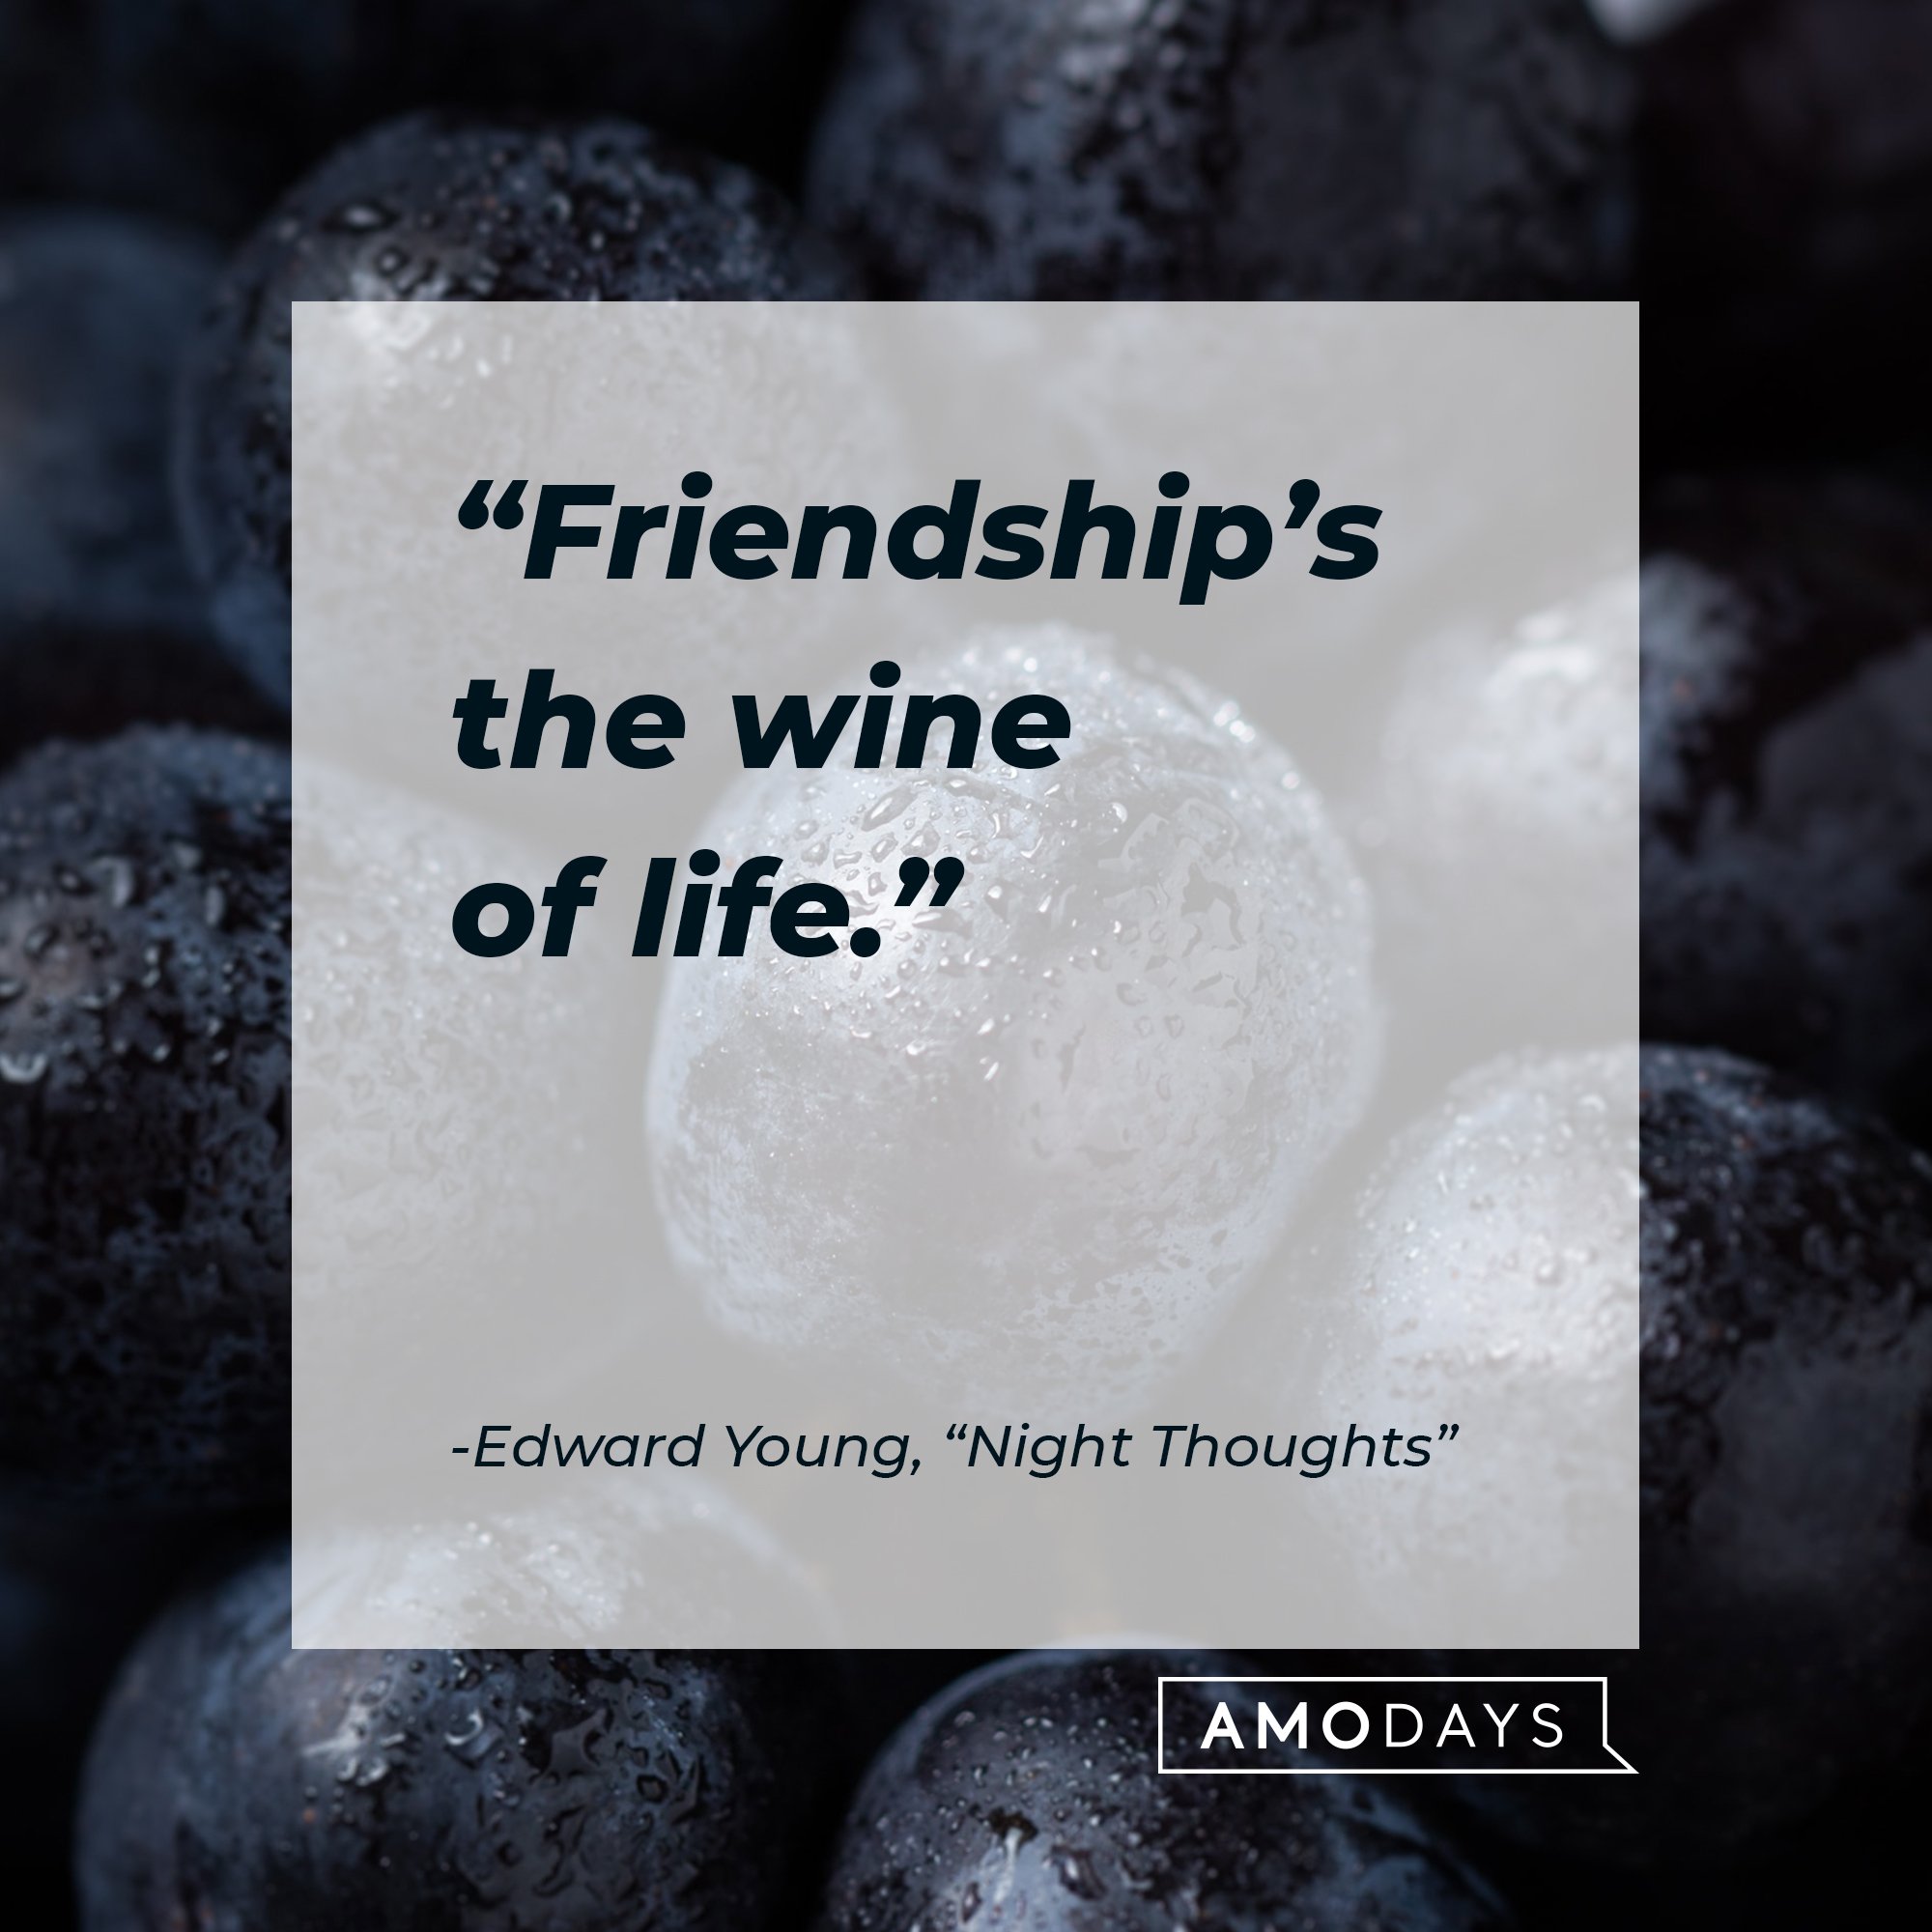 Edward Young’s quote: “Friendship’s the wine of life.” | Image: AmoDays